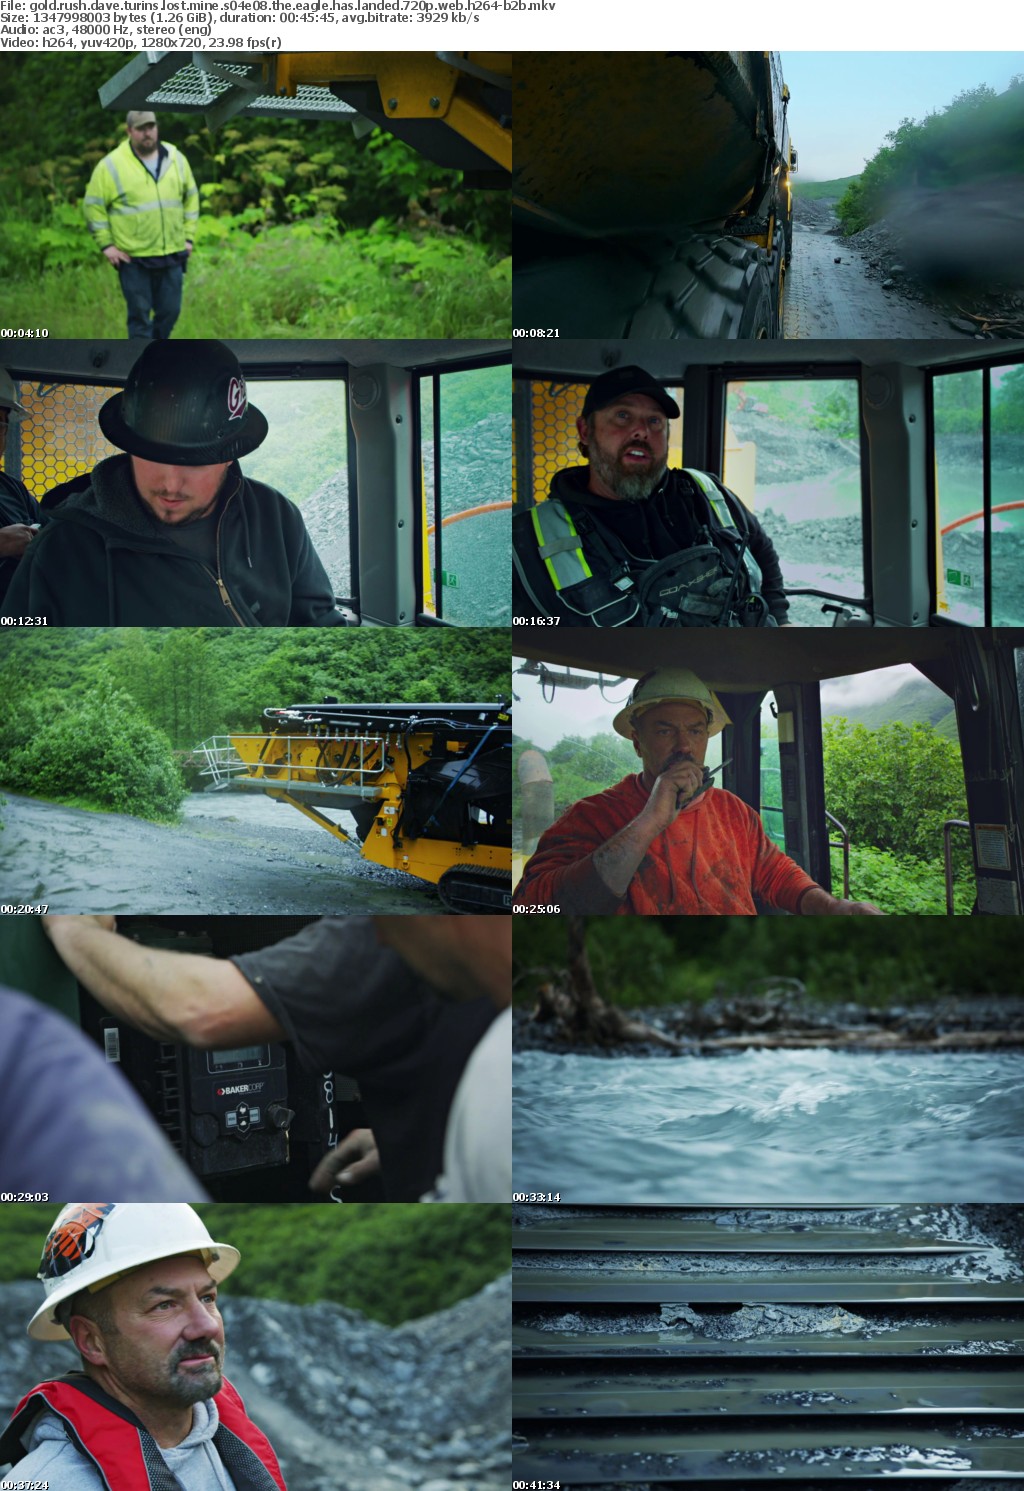 Gold Rush Dave Turins Lost Mine S04E08 The Eagle Has Landed 720p WEB h264-B2B